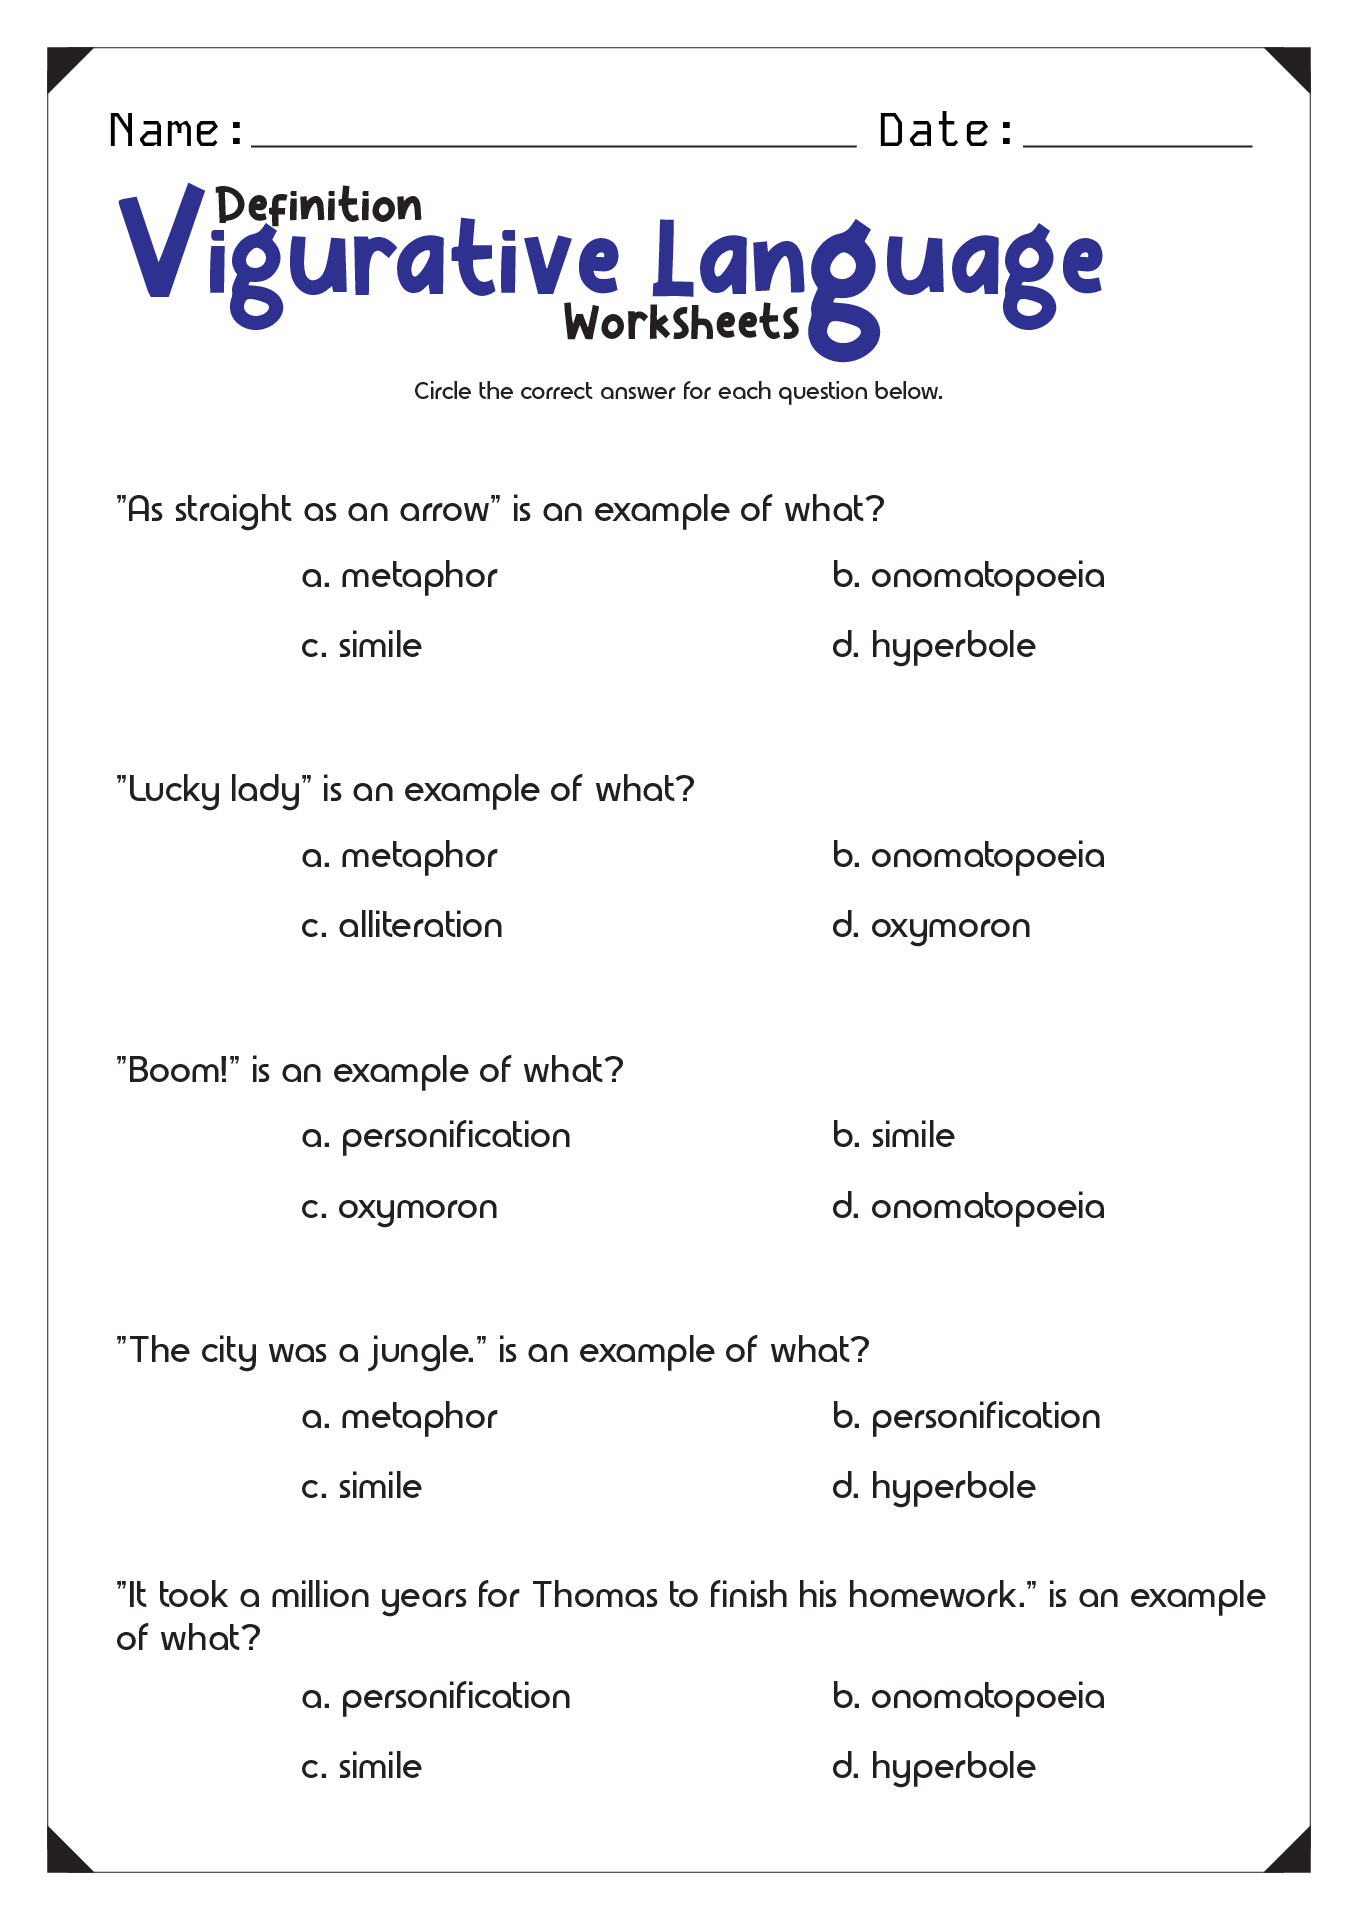 14 Best Images of Matching Definitions To Words Worksheets - 2nd Grade